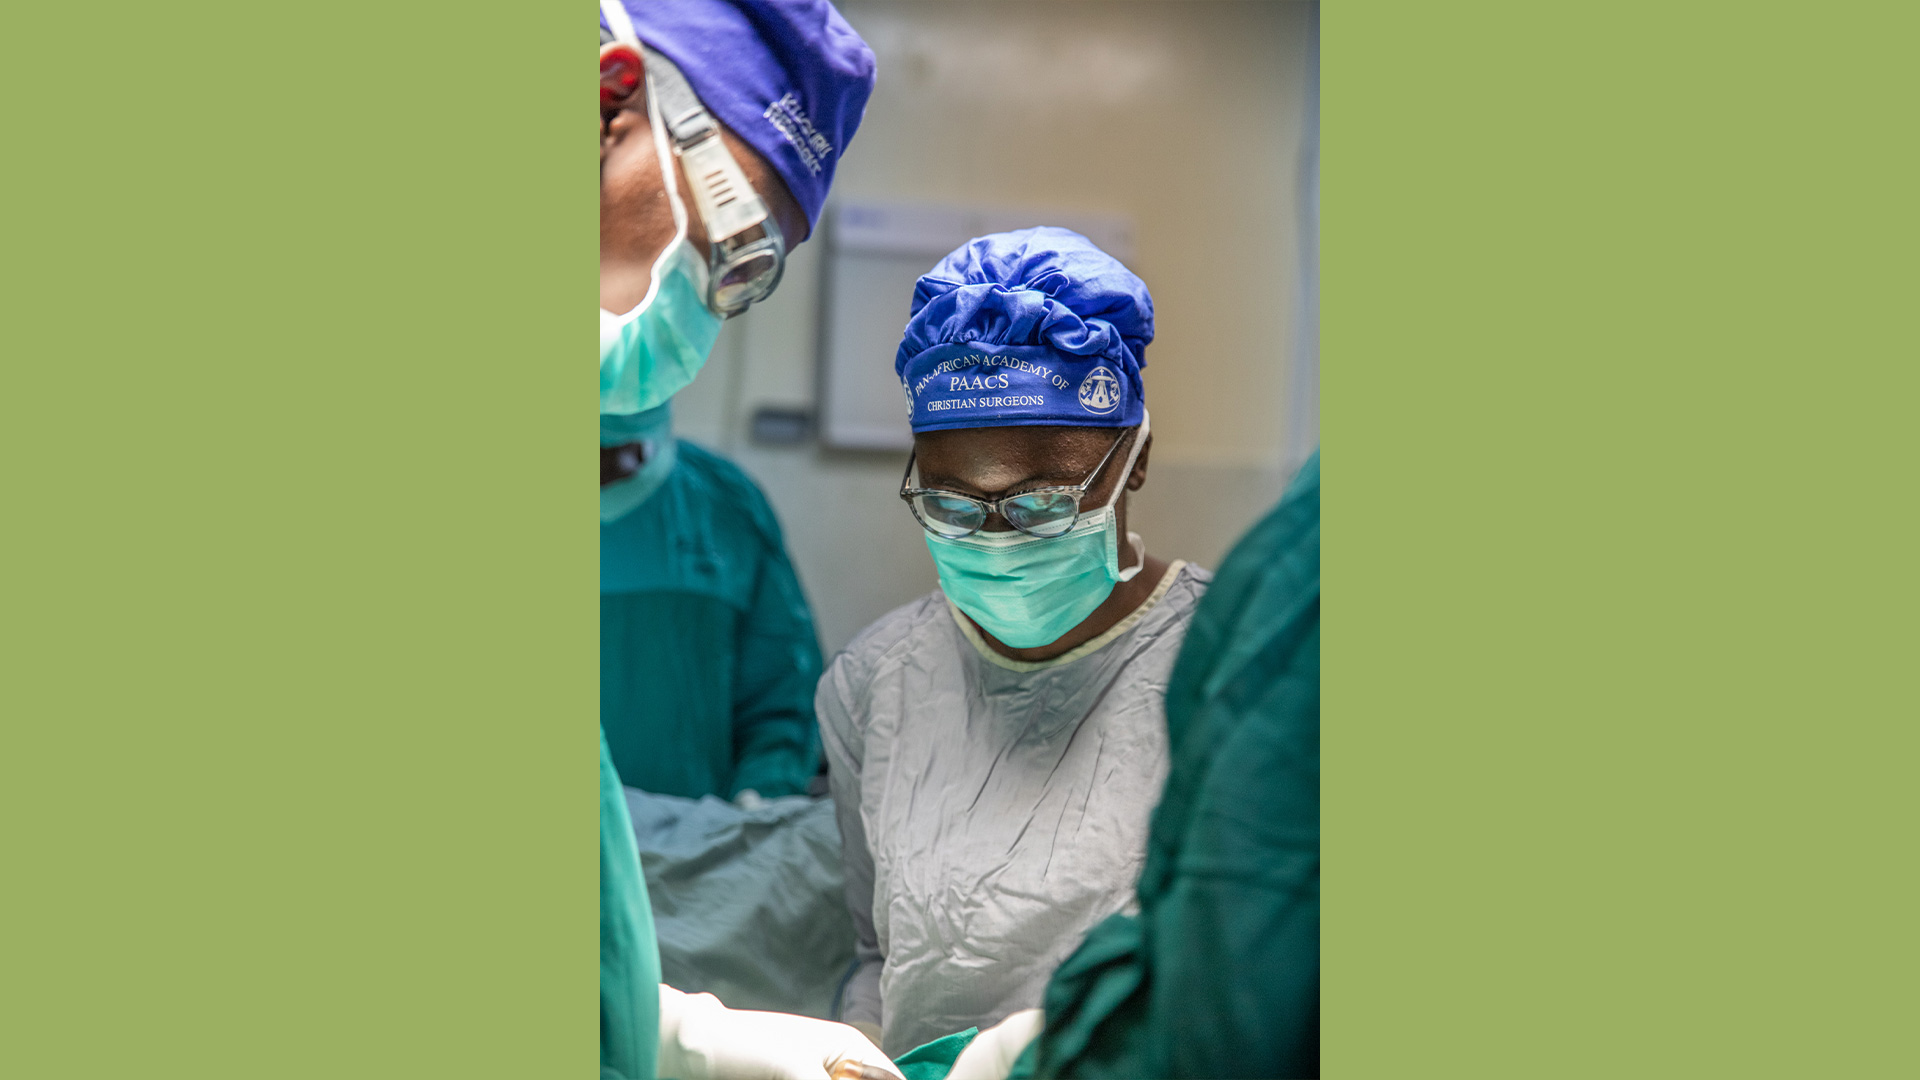 Sustainable orthopaedic surgery residency training in East Africa: A 10-year experience in Kenya